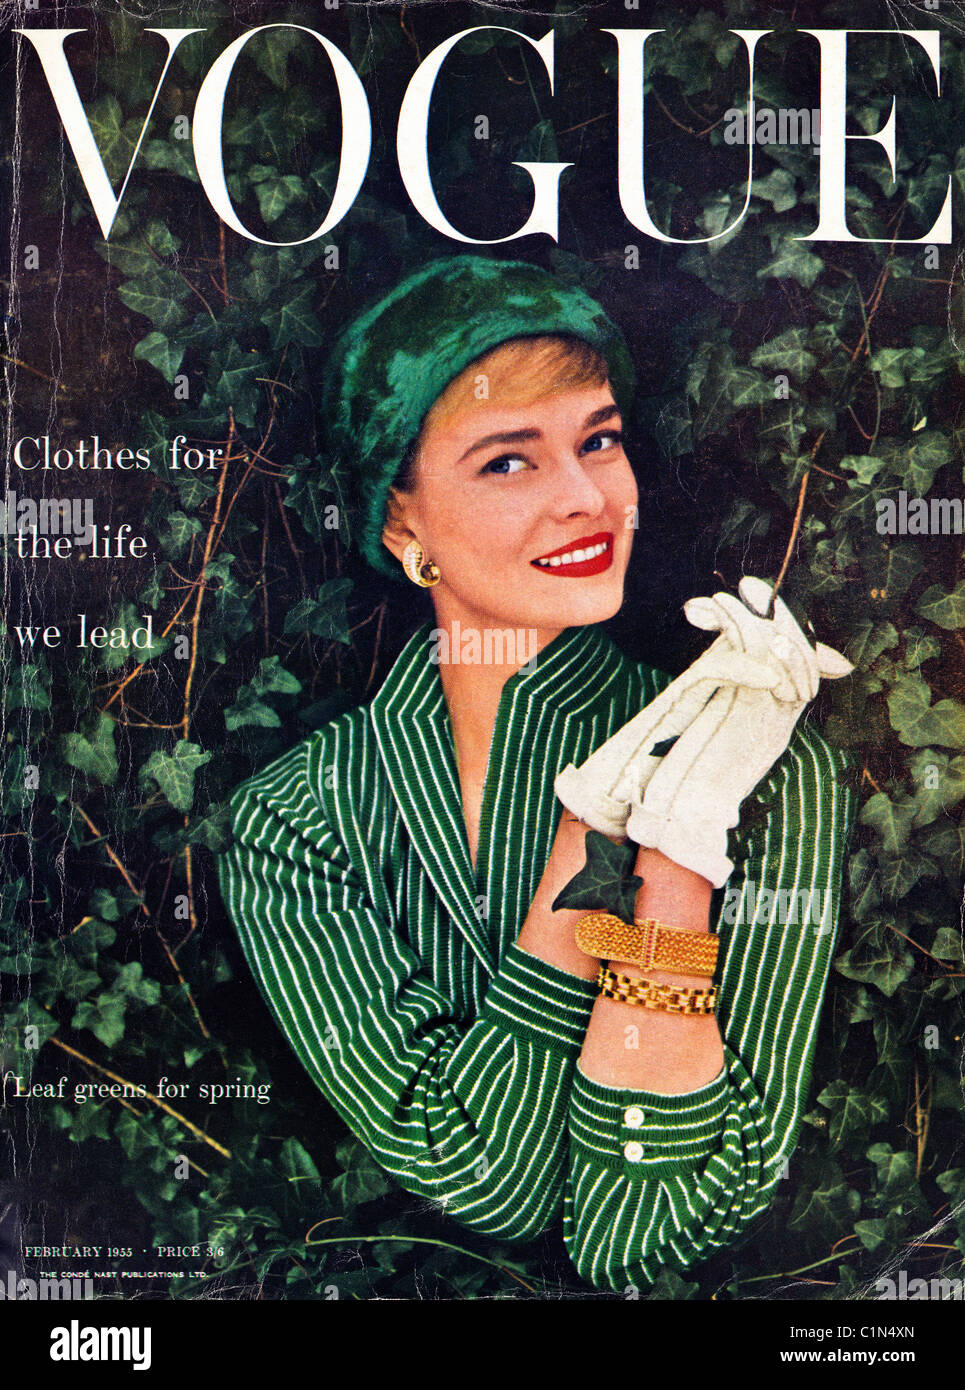 A Magazine Cover For Vanity Fair Of A Woman by L. A. Morris